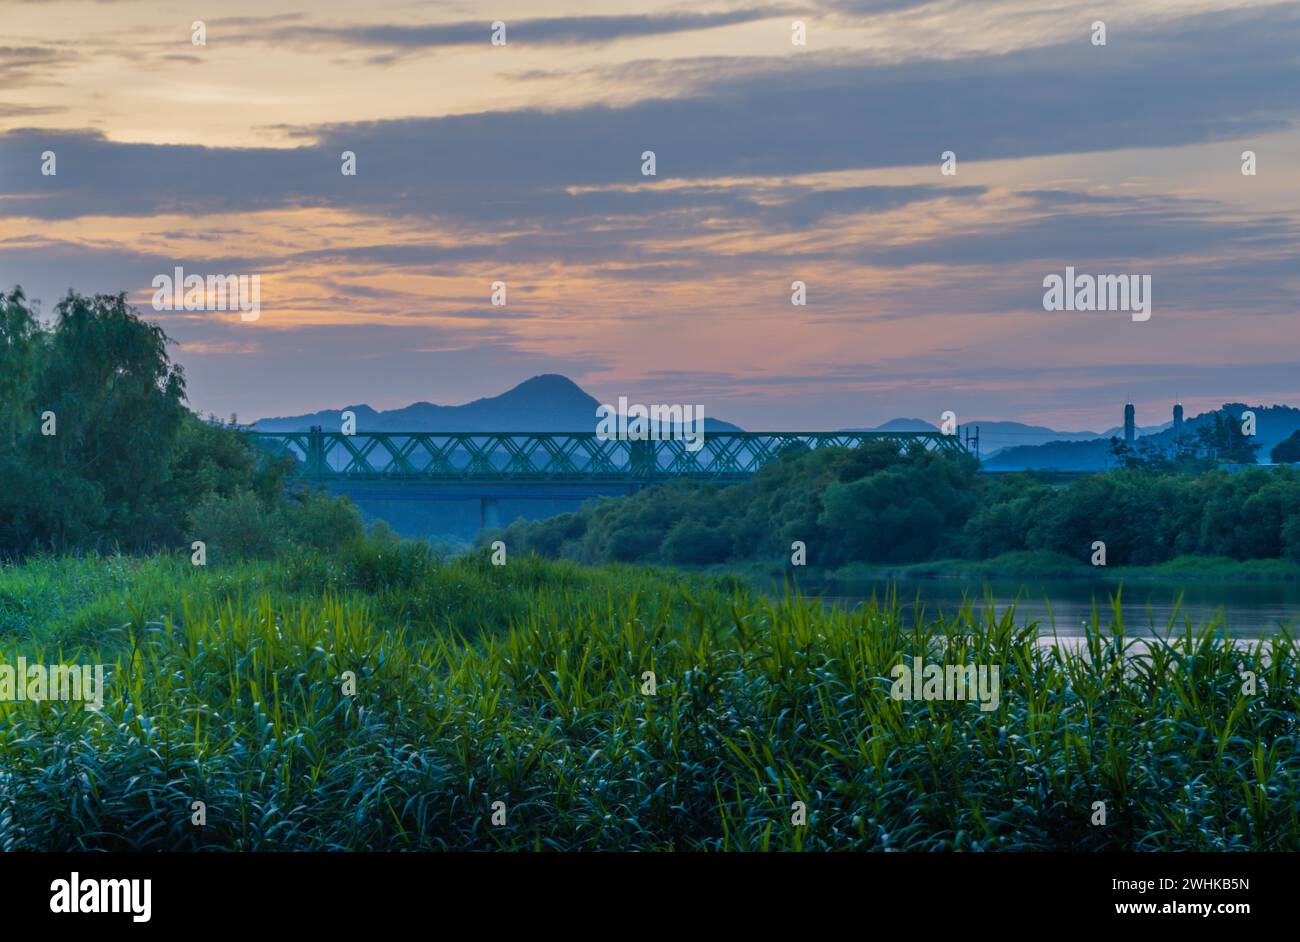 Cloudy morning sky over river in rural setting with railroad bridge and mountain in background in South Korea Stock Photo